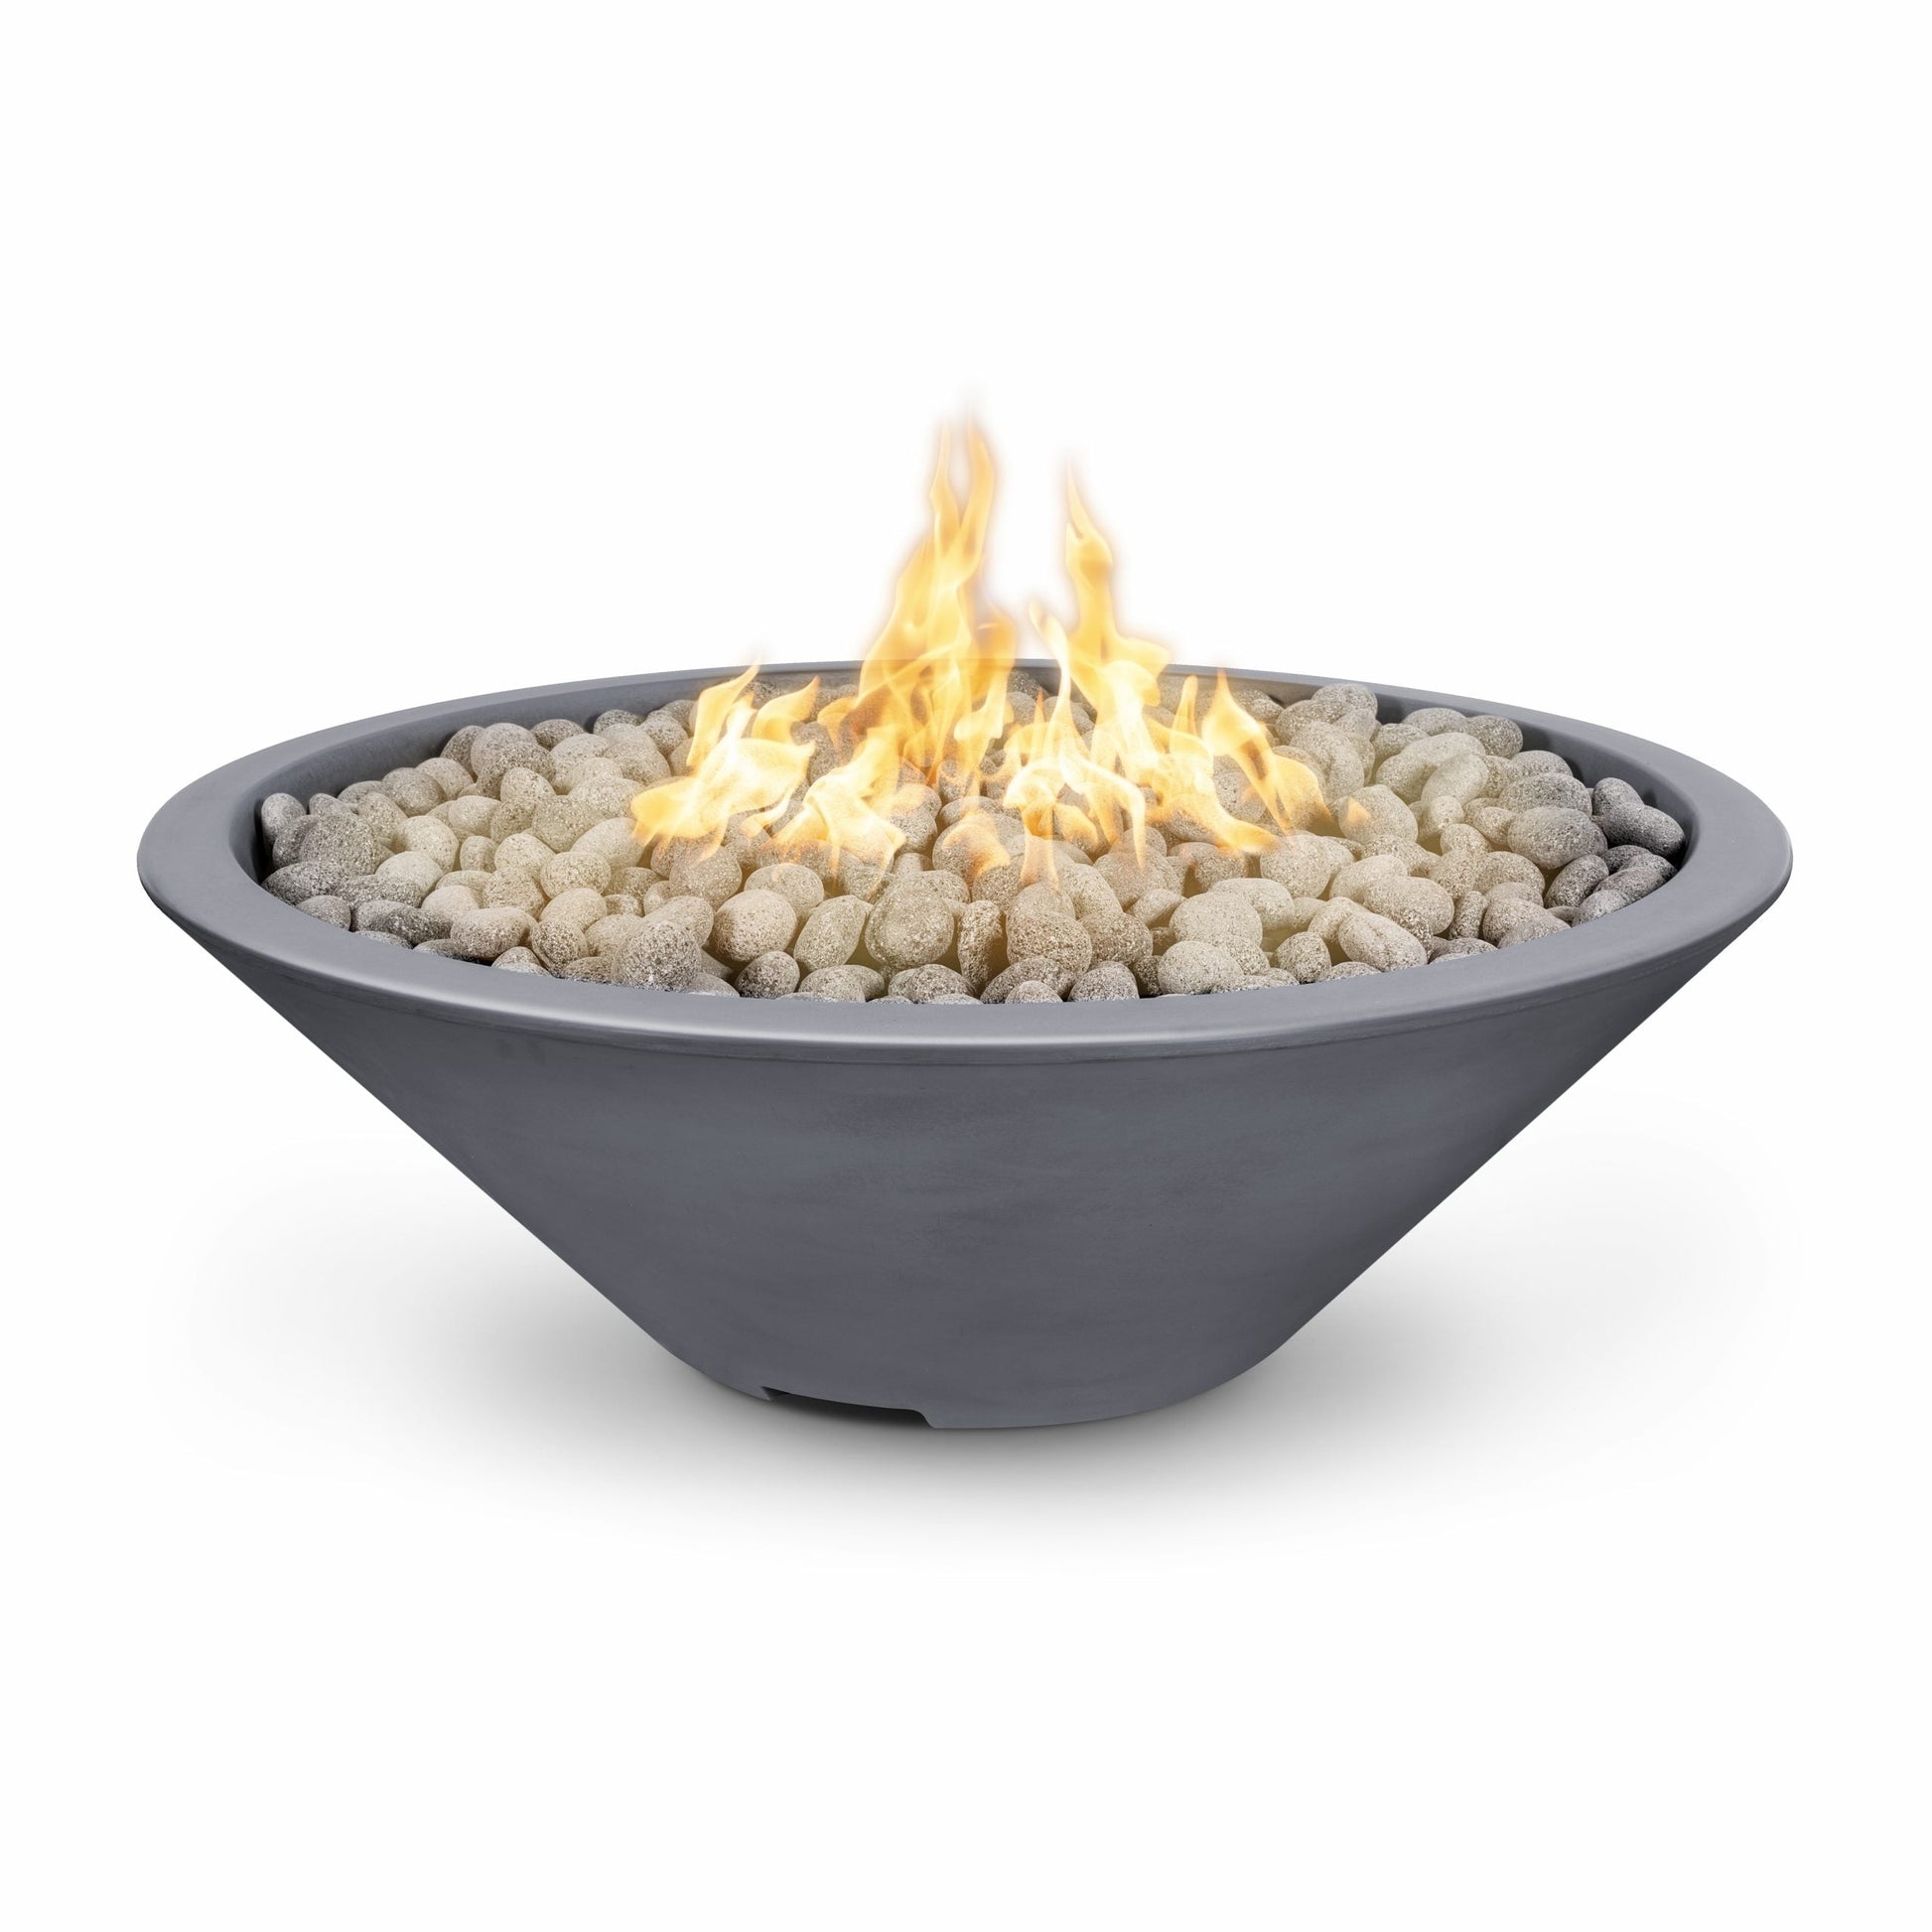 The Outdoor Plus Round Cazo 48" White Powder Coated Metal Liquid Propane Fire Pit with Match Lit with Flame Sense Ignition